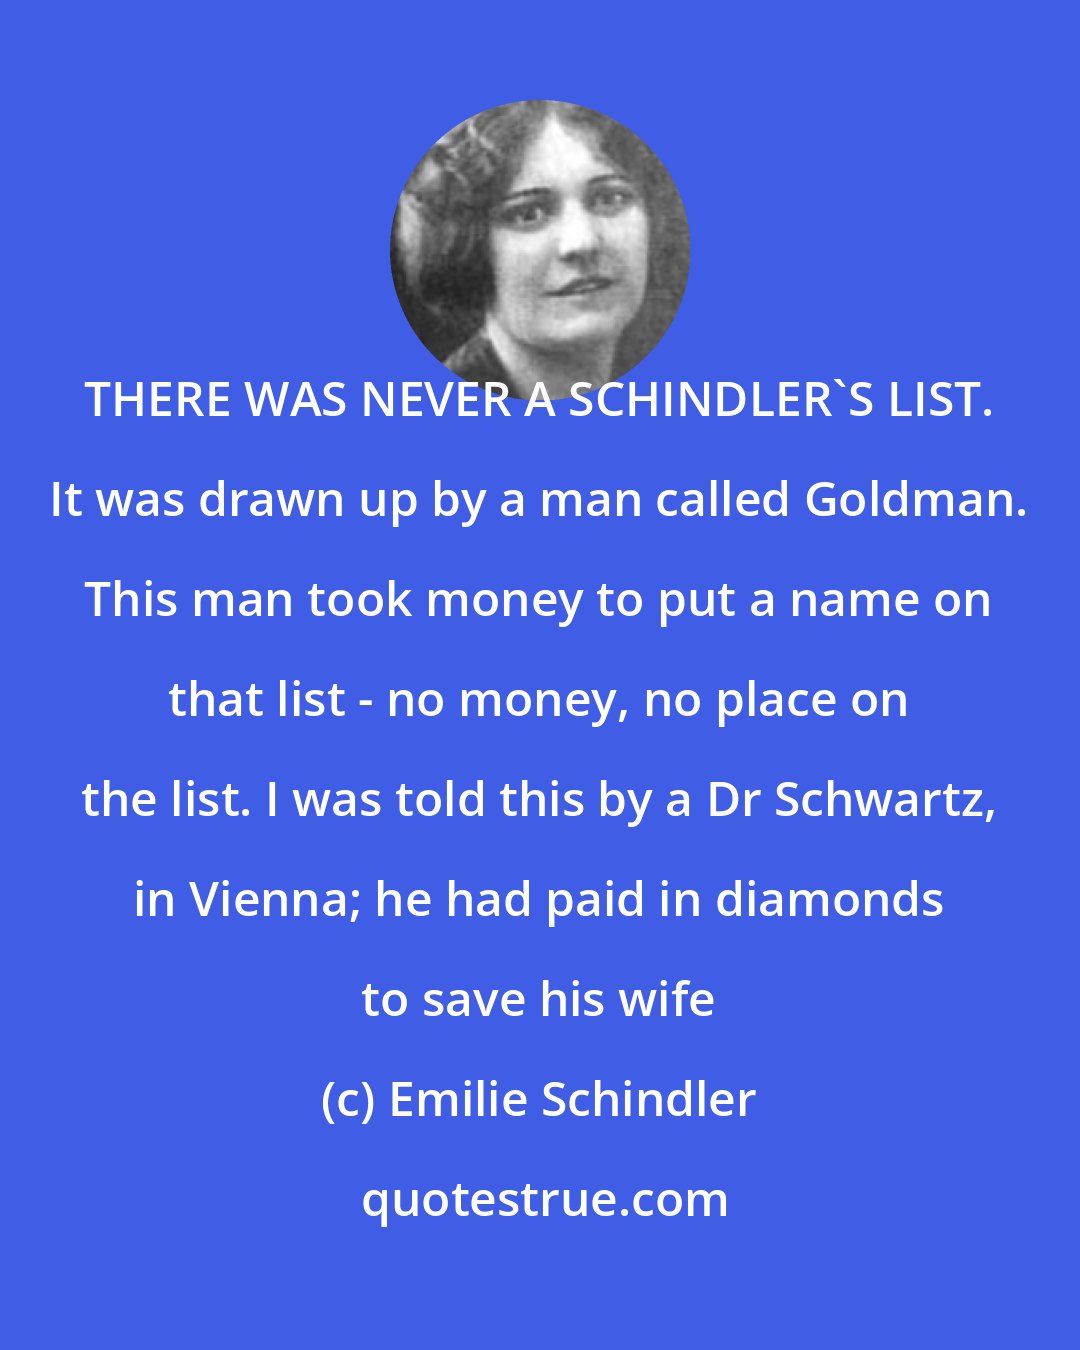 Emilie Schindler: THERE WAS NEVER A SCHINDLER'S LIST. It was drawn up by a man called Goldman. This man took money to put a name on that list - no money, no place on the list. I was told this by a Dr Schwartz, in Vienna; he had paid in diamonds to save his wife